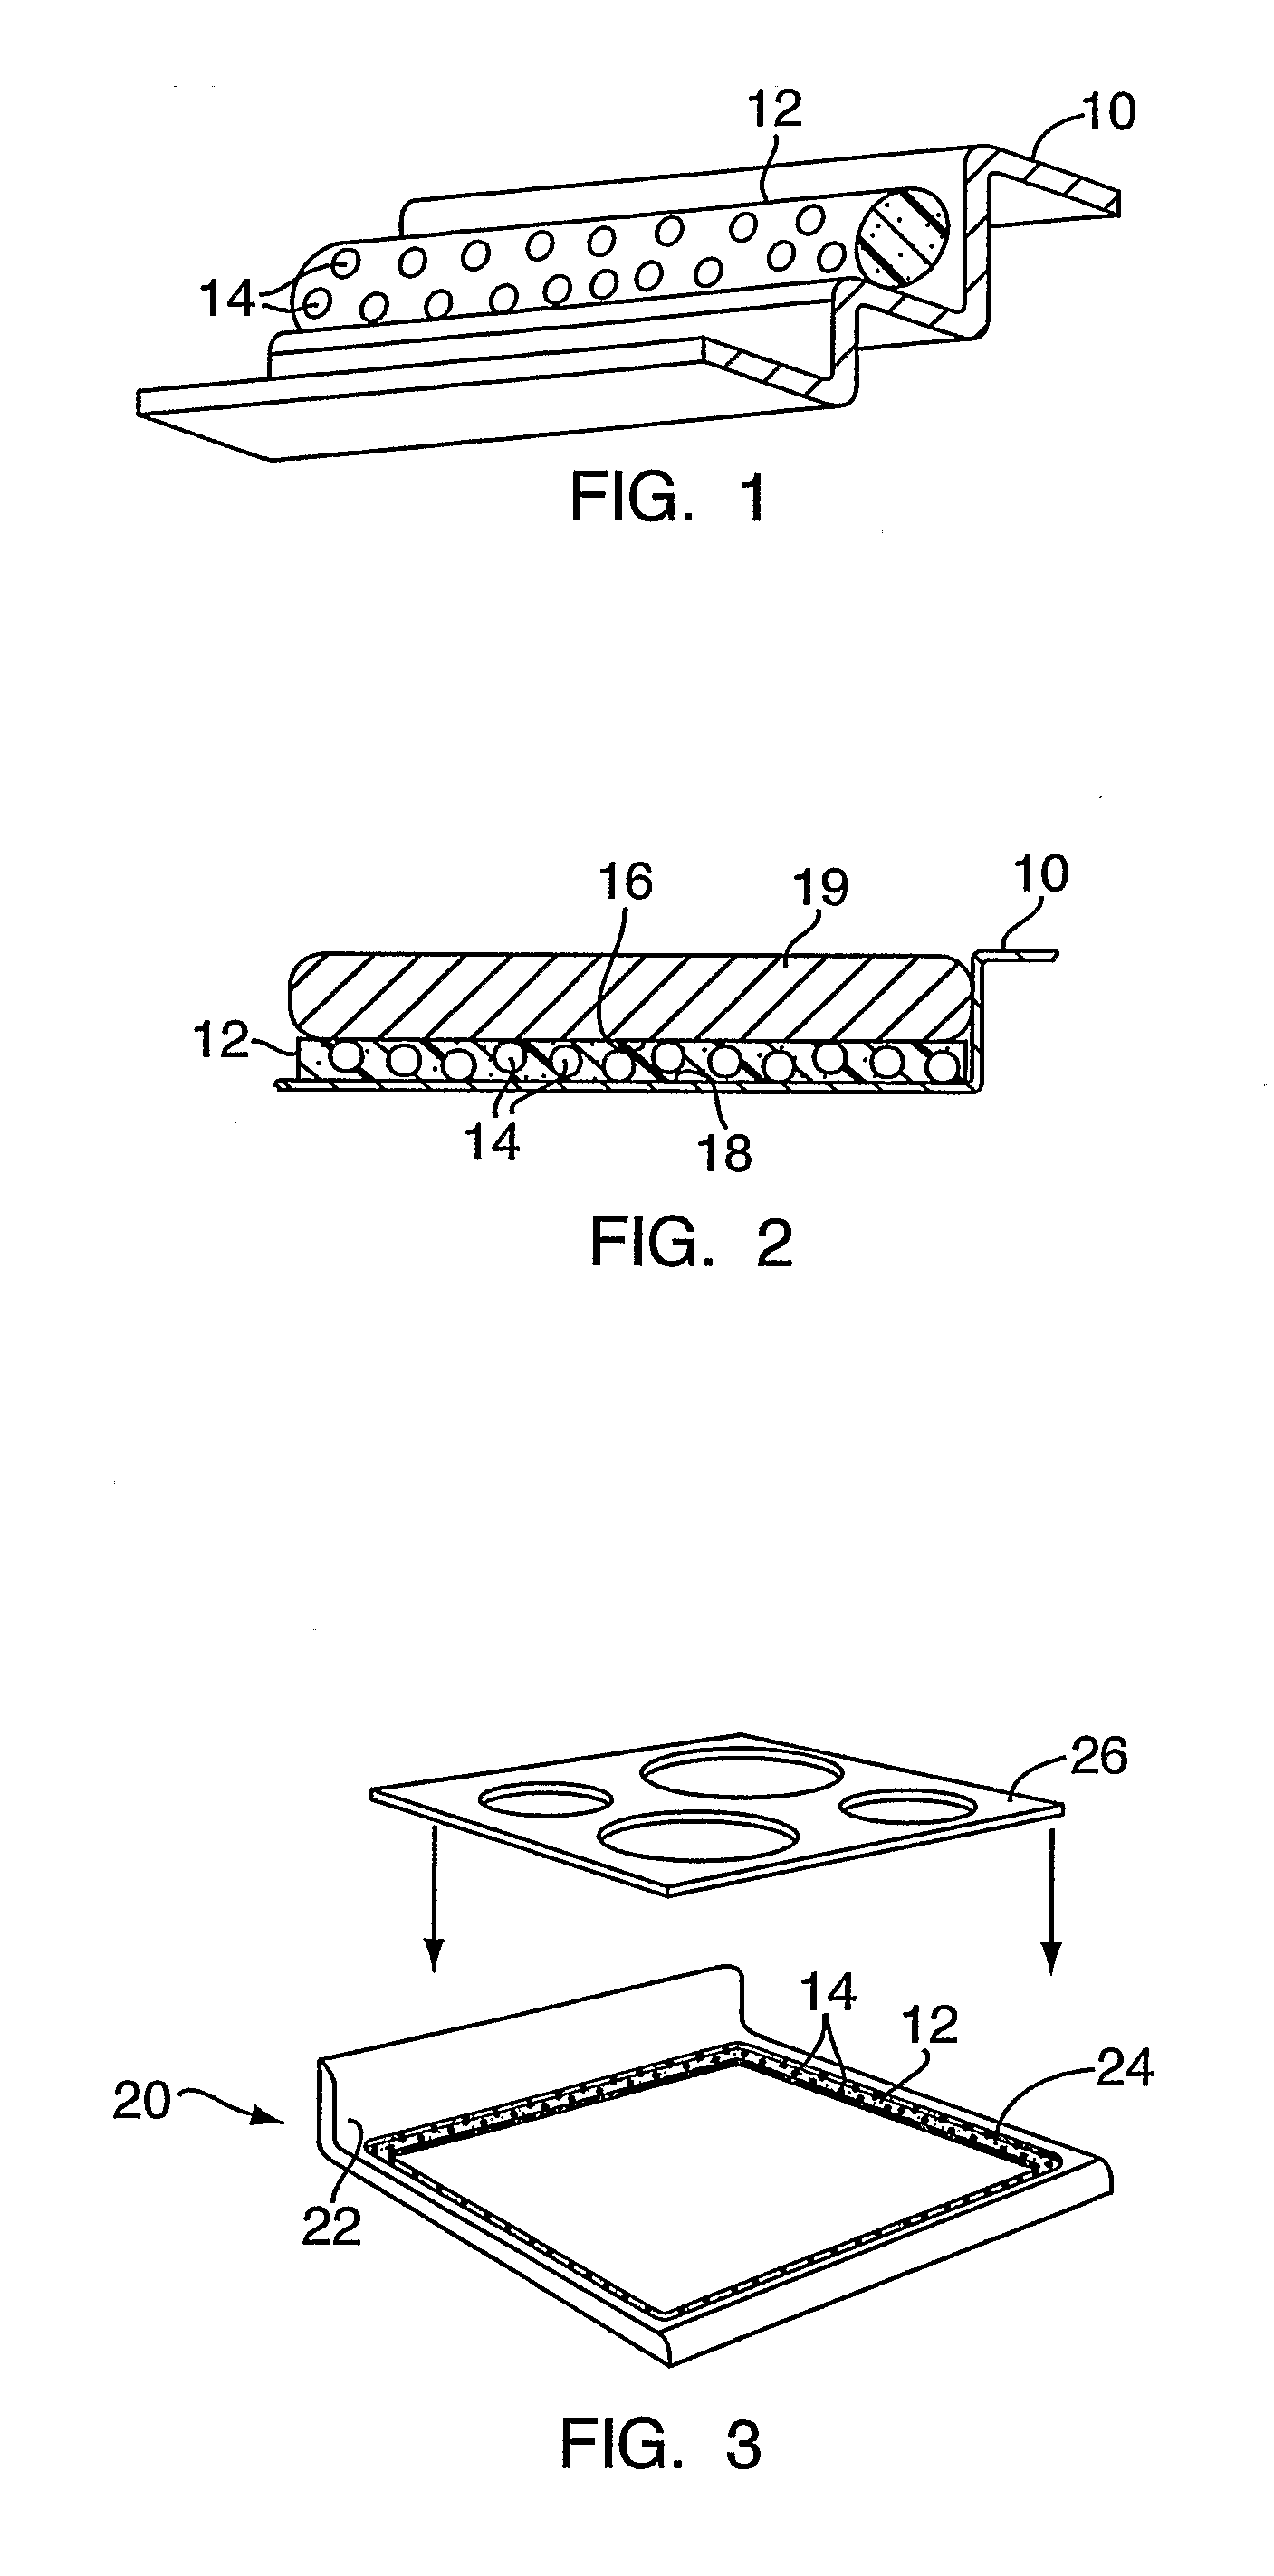 Compositions and processes for Assembling Appliances